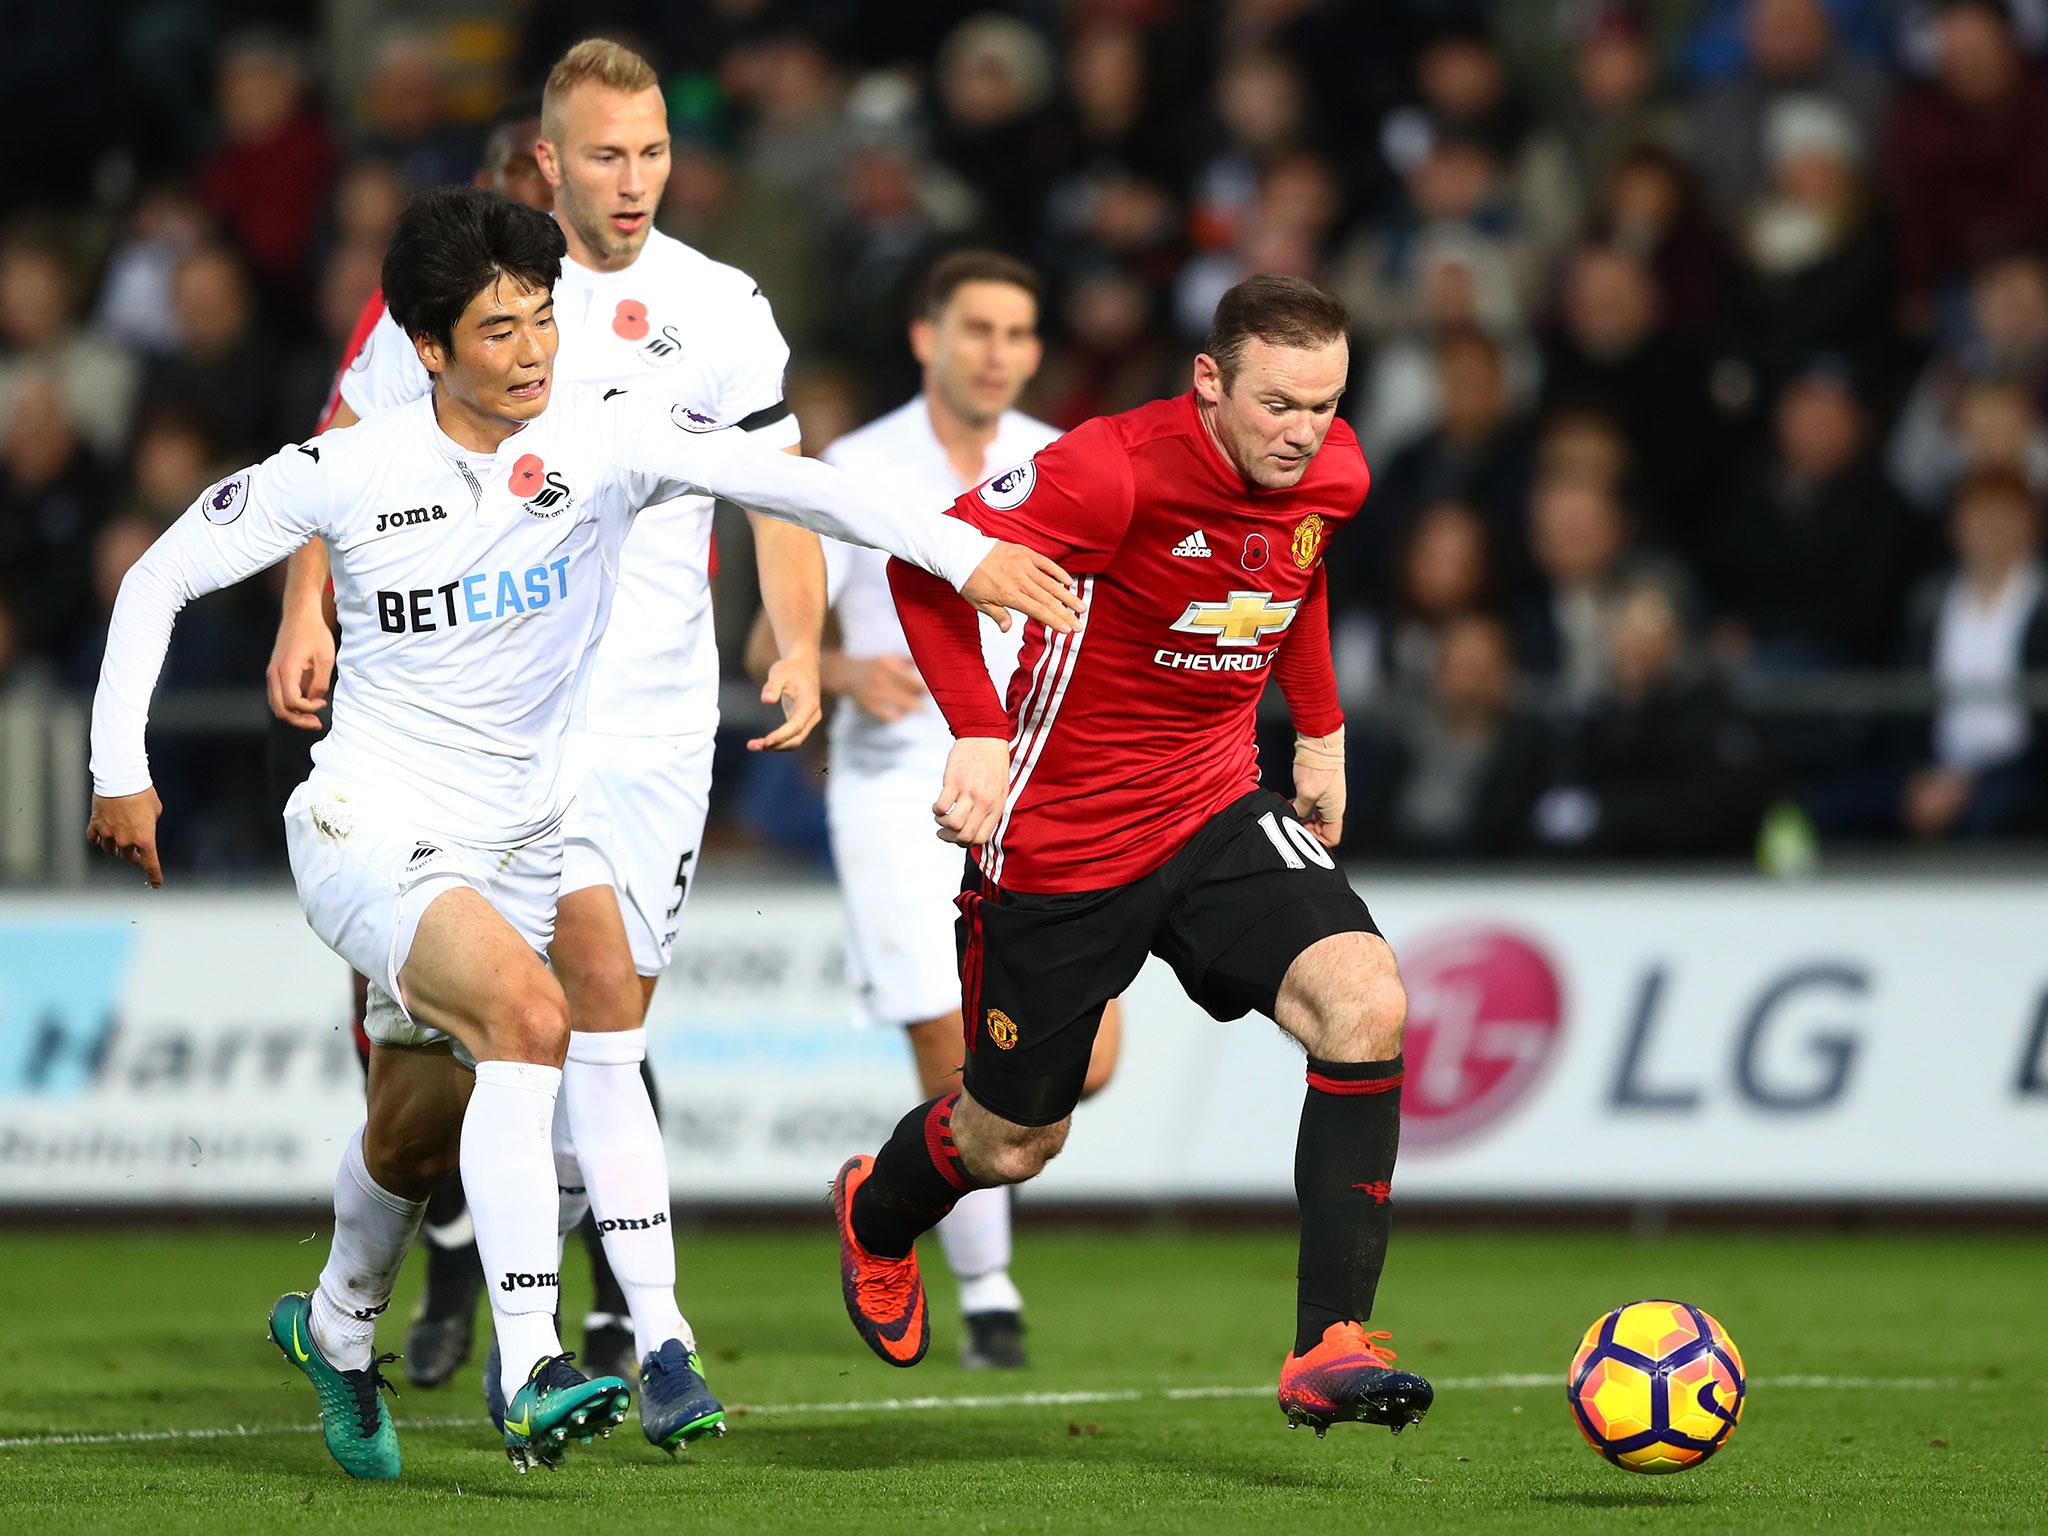 Rooney was impressive for United in recent games against Swansea and Fenerbahce